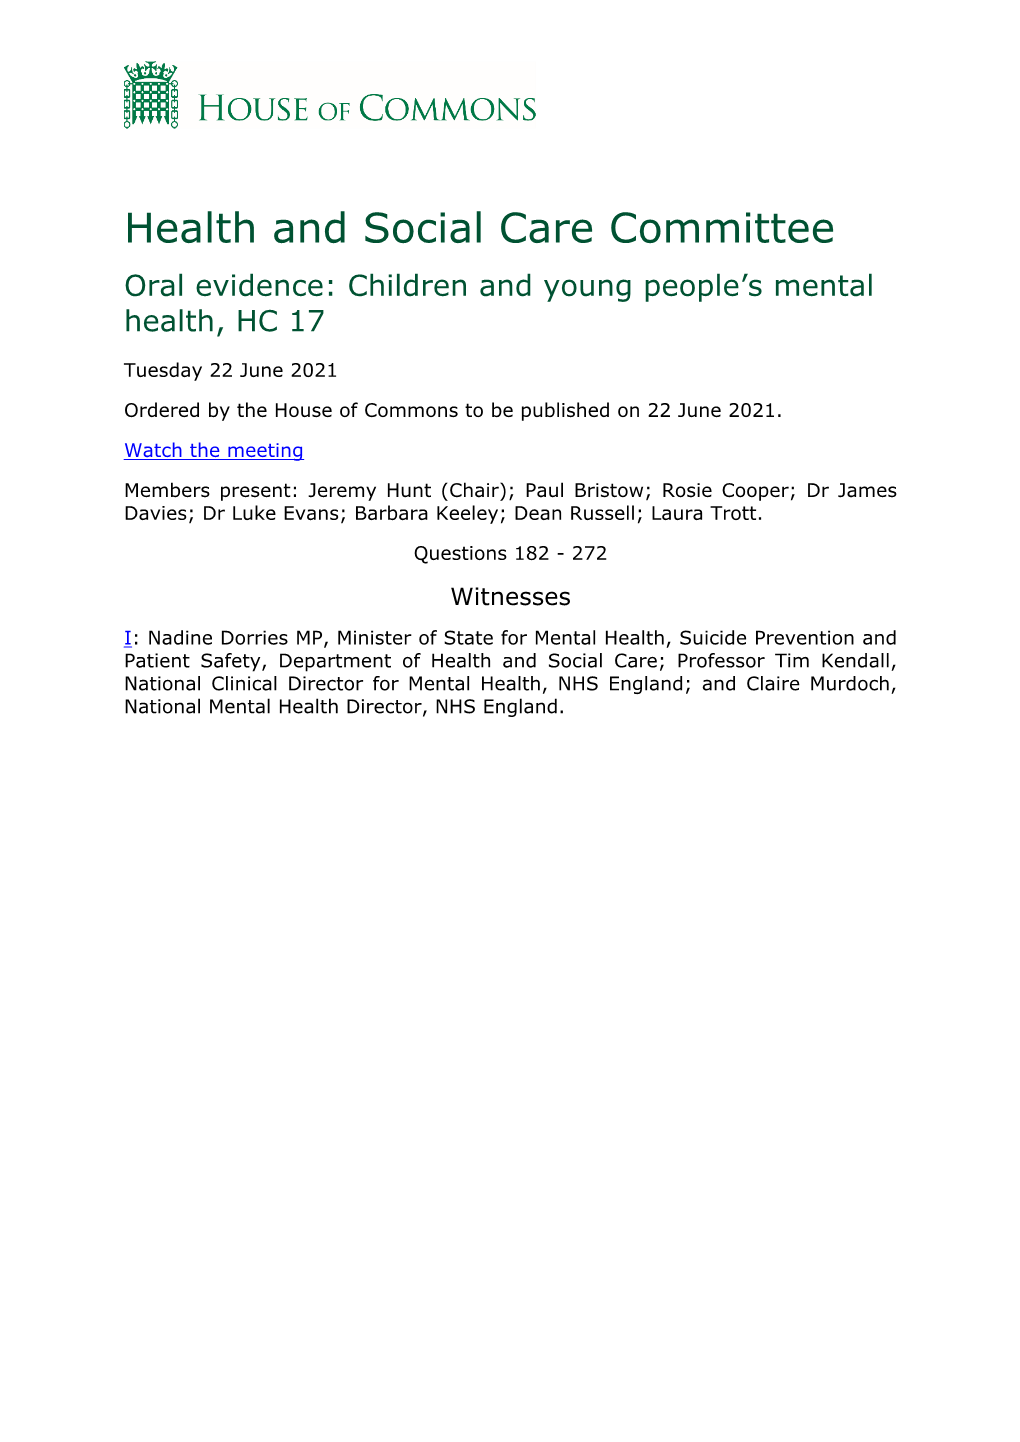 Health and Social Care Committee Oral Evidence: Children and Young People’S Mental Health, HC 17